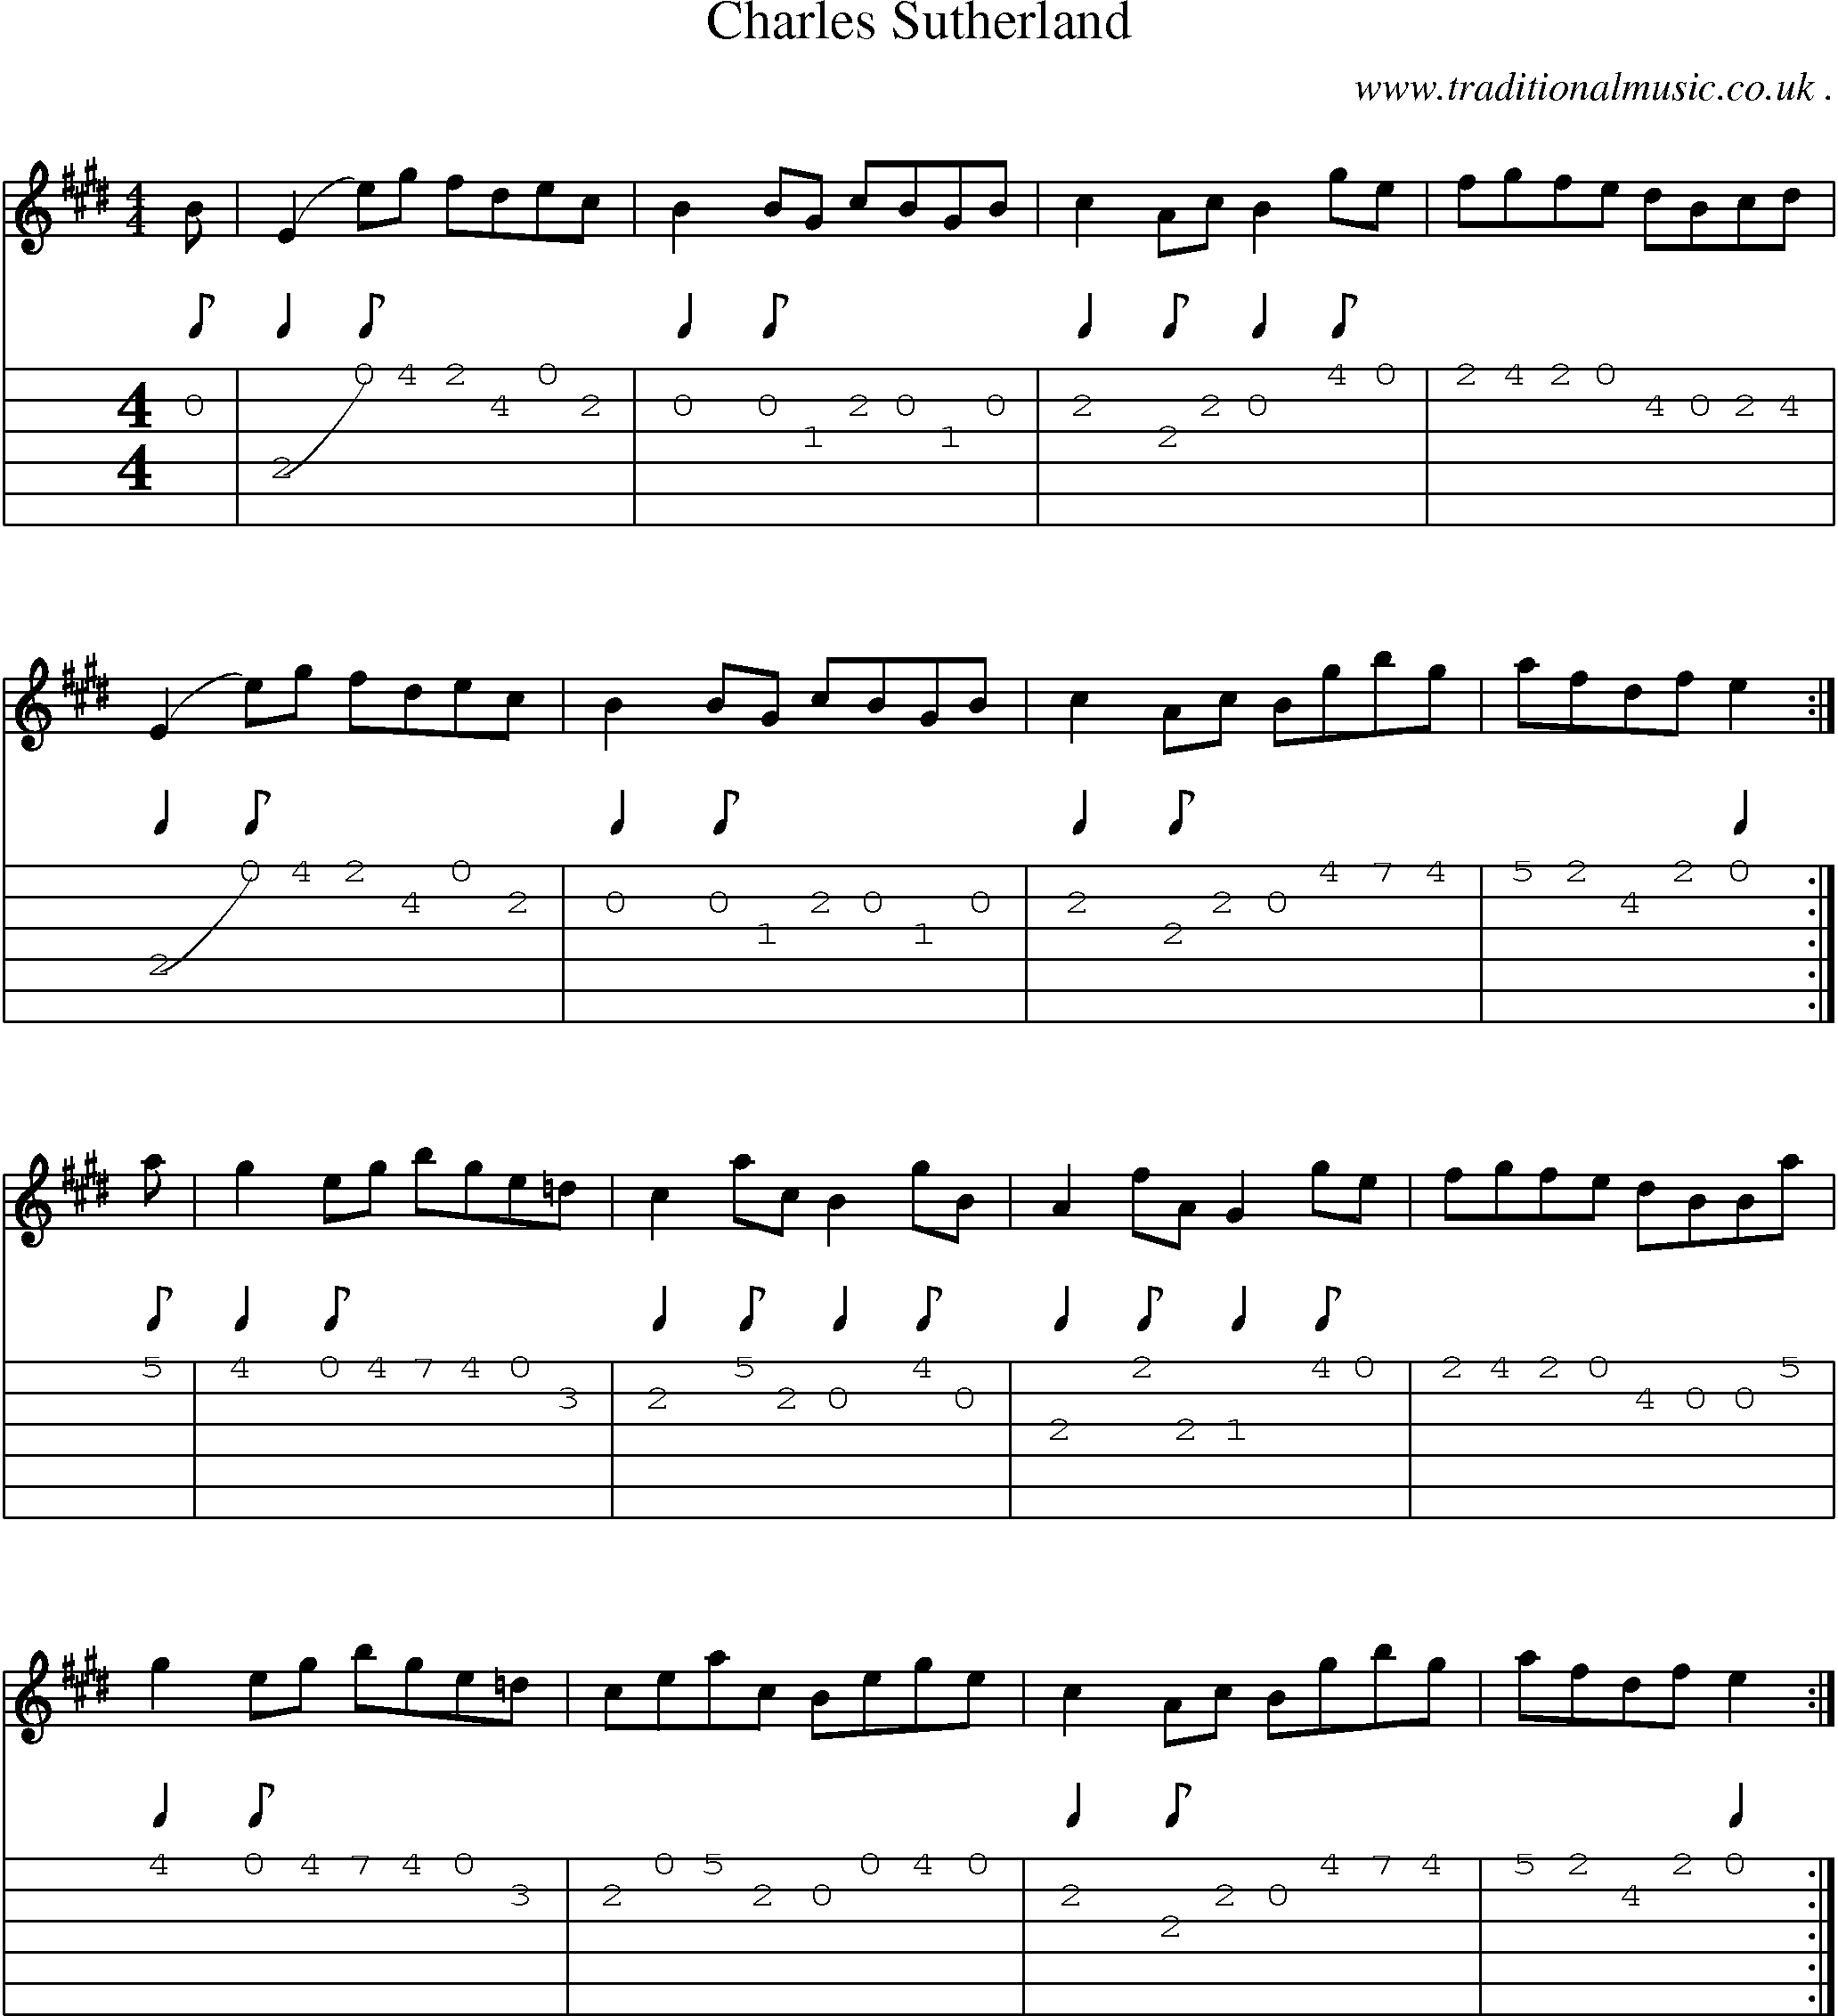 Sheet-music  score, Chords and Guitar Tabs for Charles Sutherland